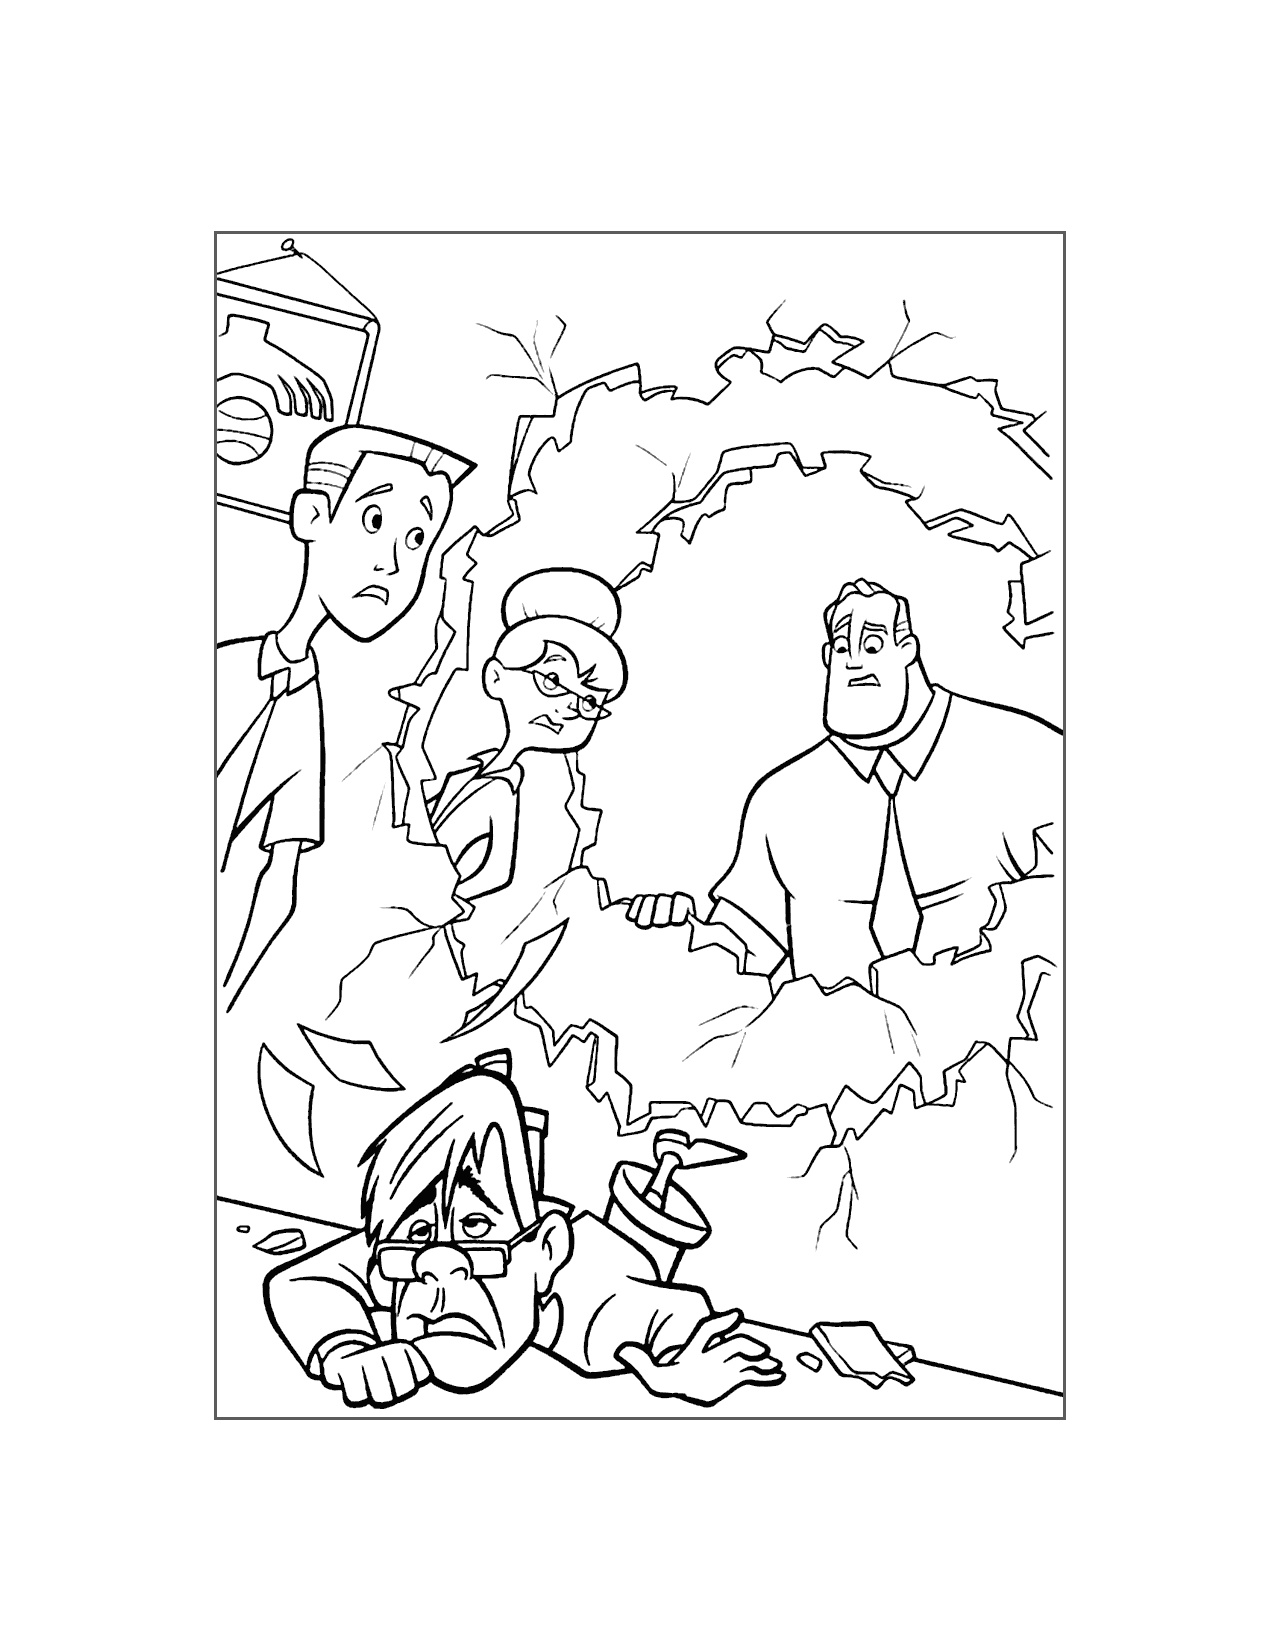 Bob Parr Has A Disagreement With His Boss Incredibles Coloring Pages